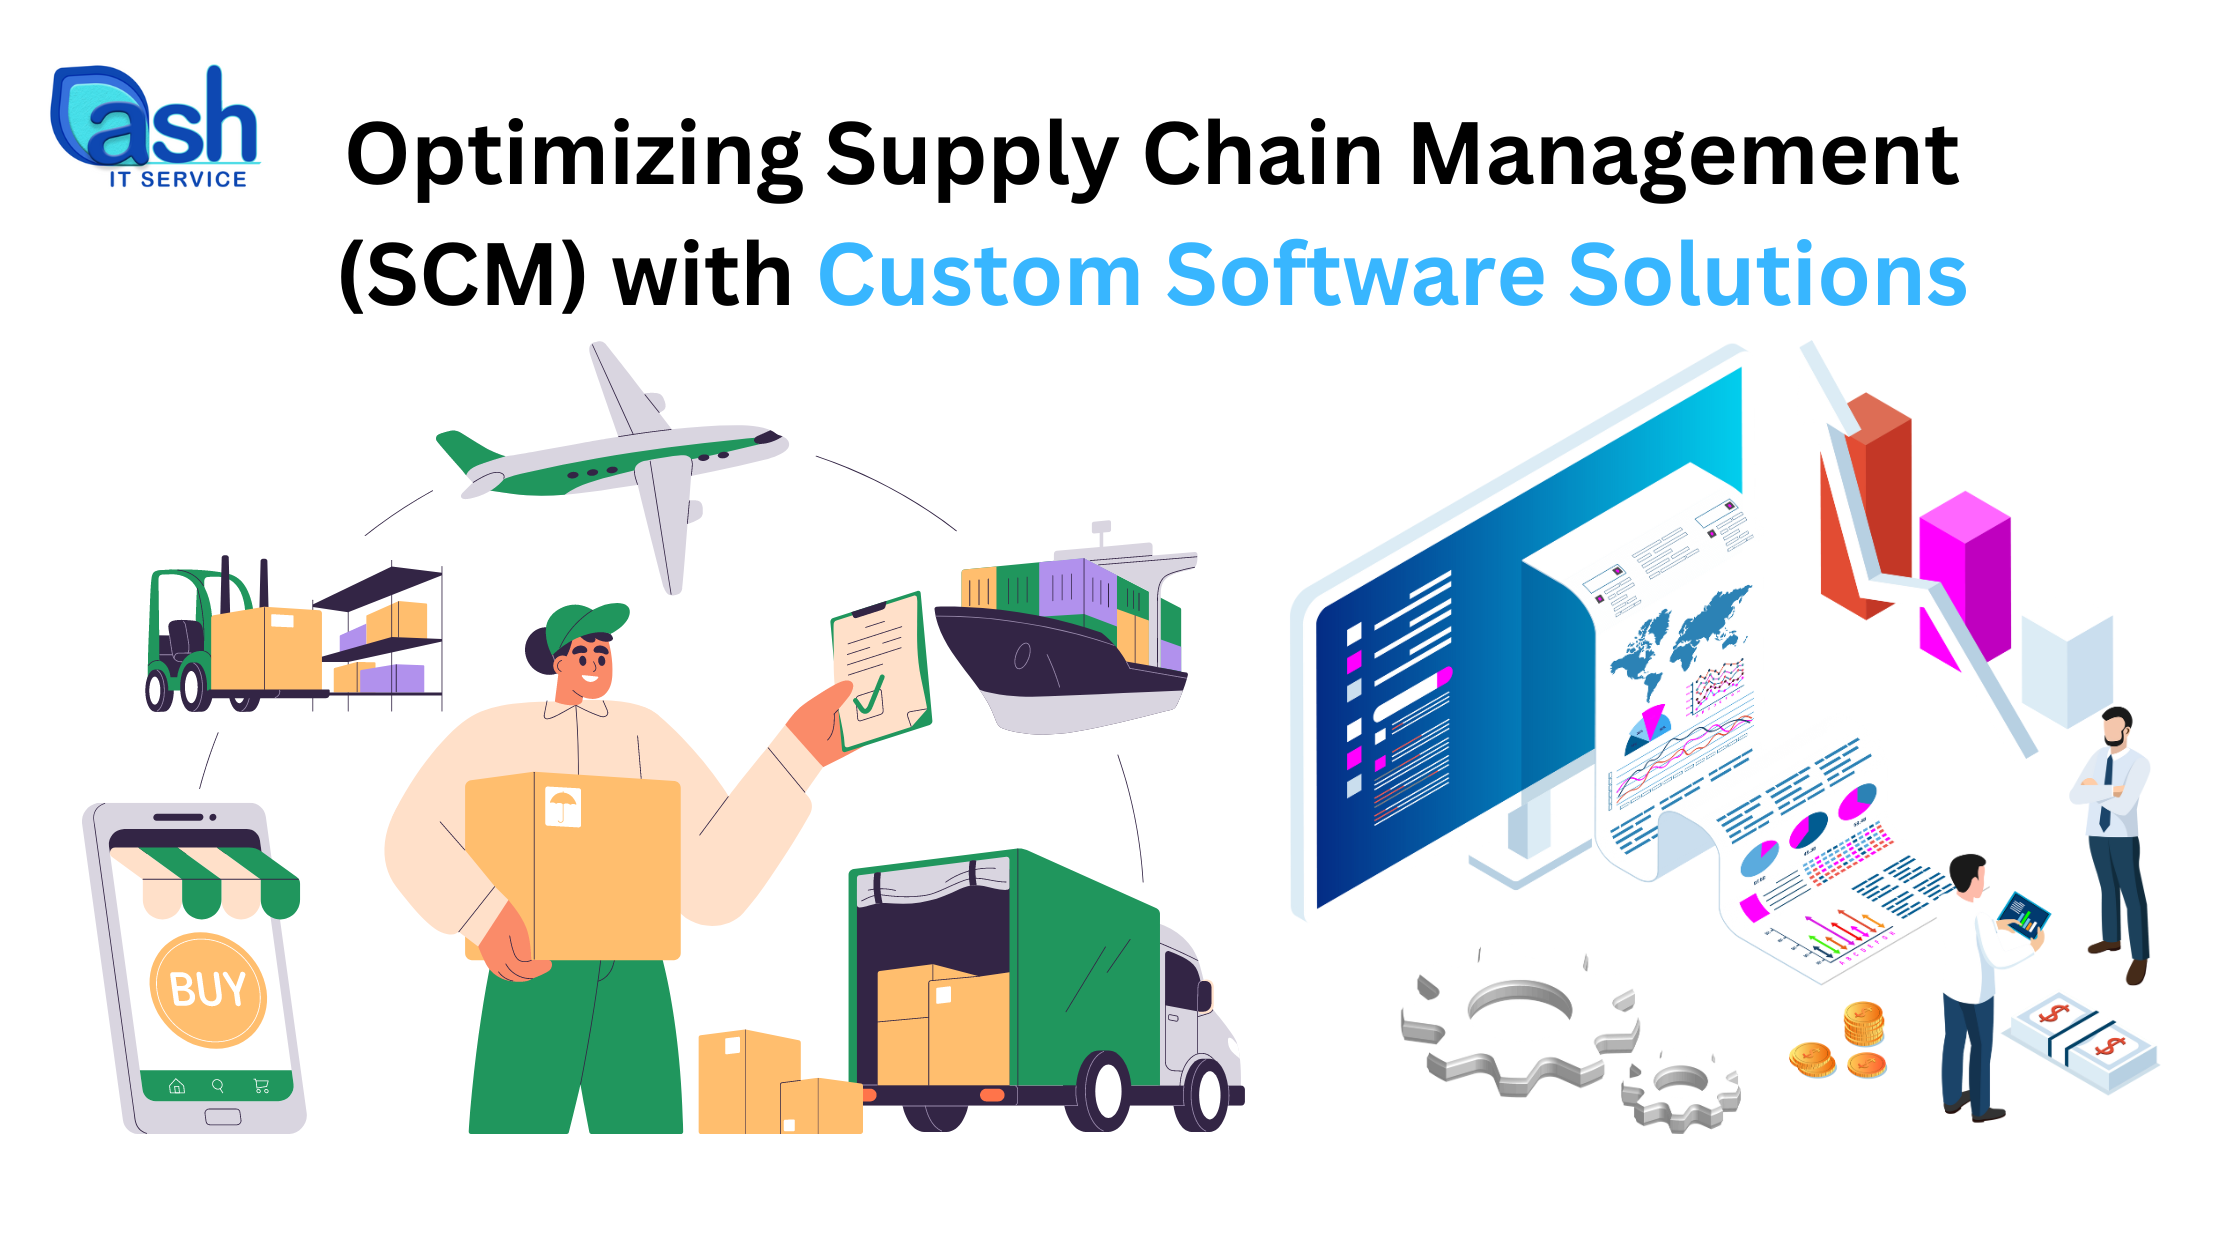 Optimizing Supply Chain Management (SCM) with Custom Software Solutions